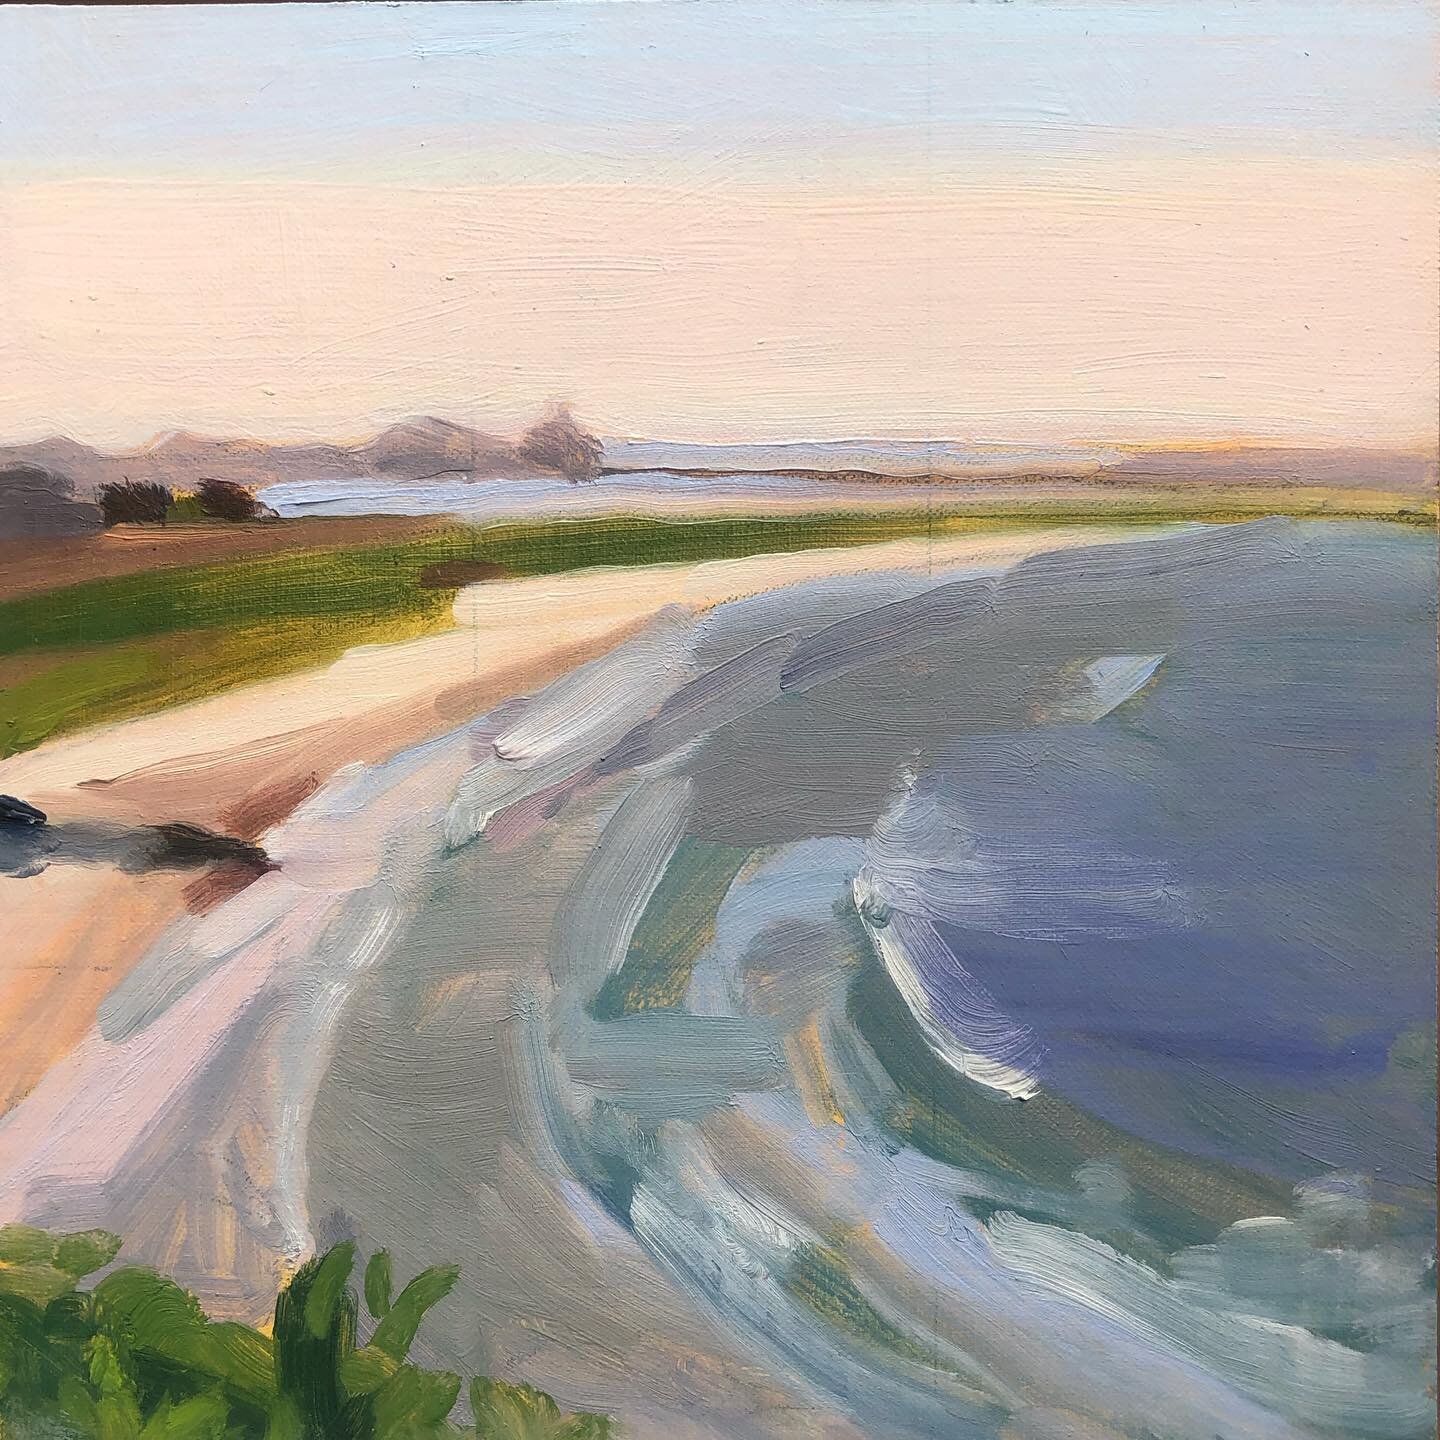 &ldquo;Fog Lifting&rdquo; oil/linen/wood 8&rdquo; x 8&rdquo; by Jill Madden. Such a lovely palette&hellip; completely captures the beauty of this bit of coastline. On display in our current exhibition PLACES WE LOVE! DM inquiries #jillmadden #robdieb